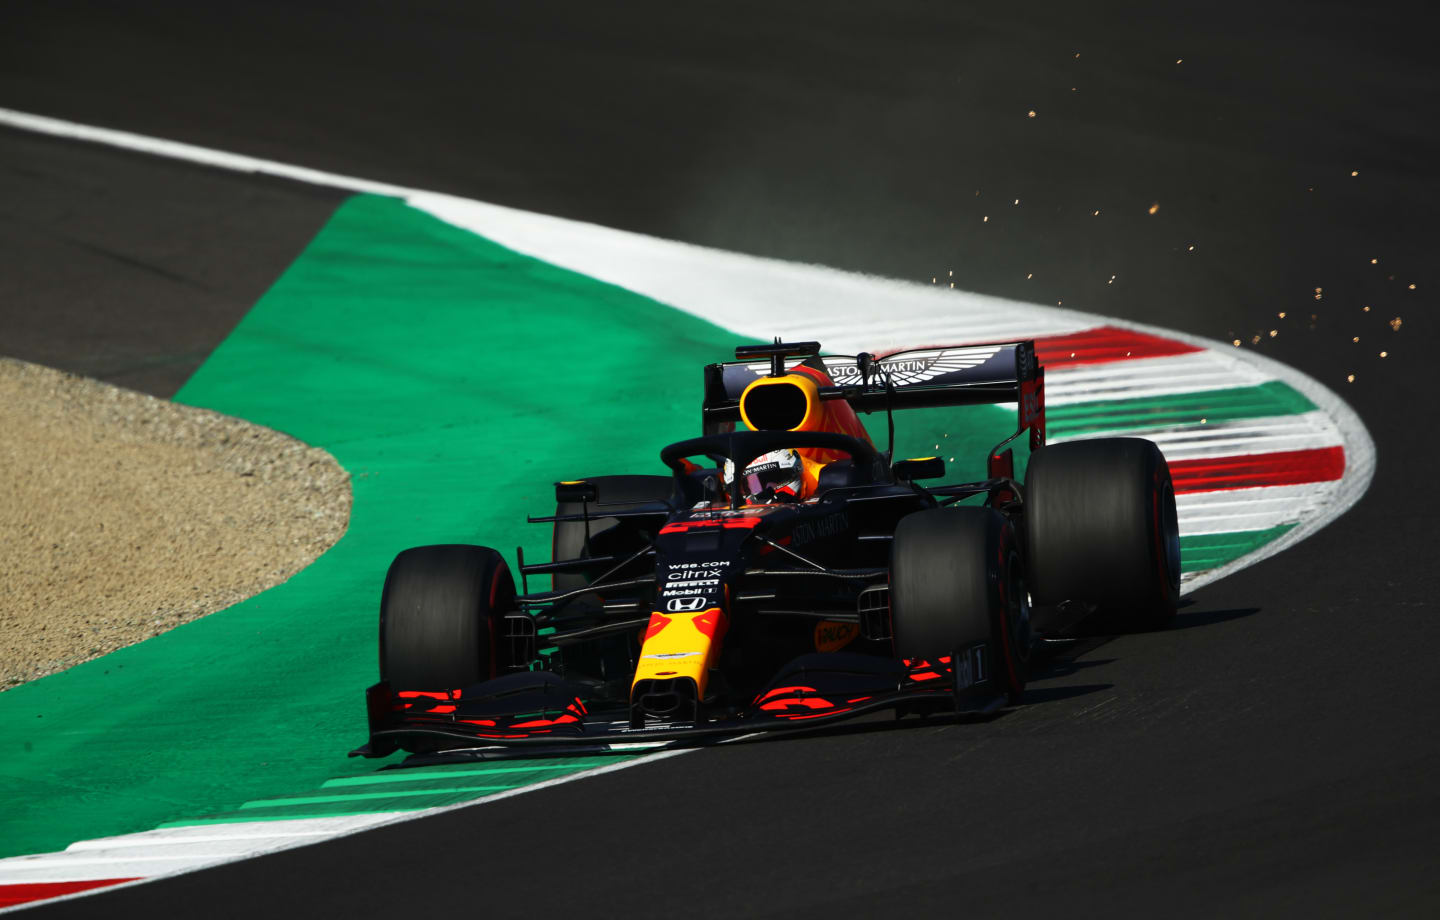 SCARPERIA, ITALY - SEPTEMBER 12: Max Verstappen of the Netherlands driving the (33) Aston Martin Red Bull Racing RB16 on track during qualifying for the F1 Grand Prix of Tuscany at Mugello Circuit on September 12, 2020 in Scarperia, Italy. (Photo by Bryn Lennon/Getty Images)